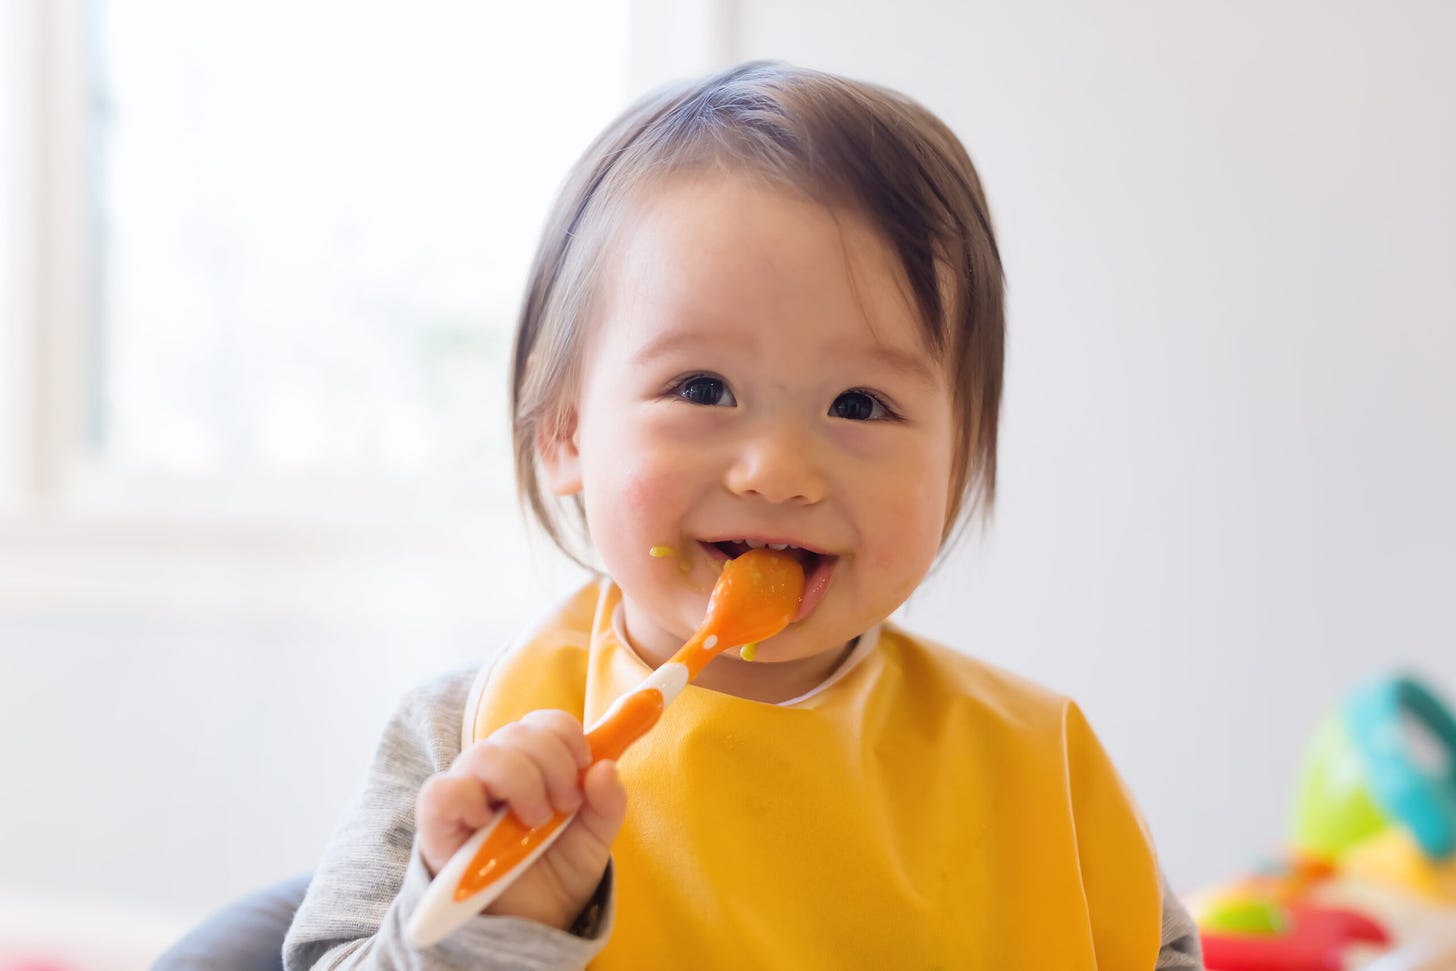 Image of a happy little baby boy with preferences for healthy foods